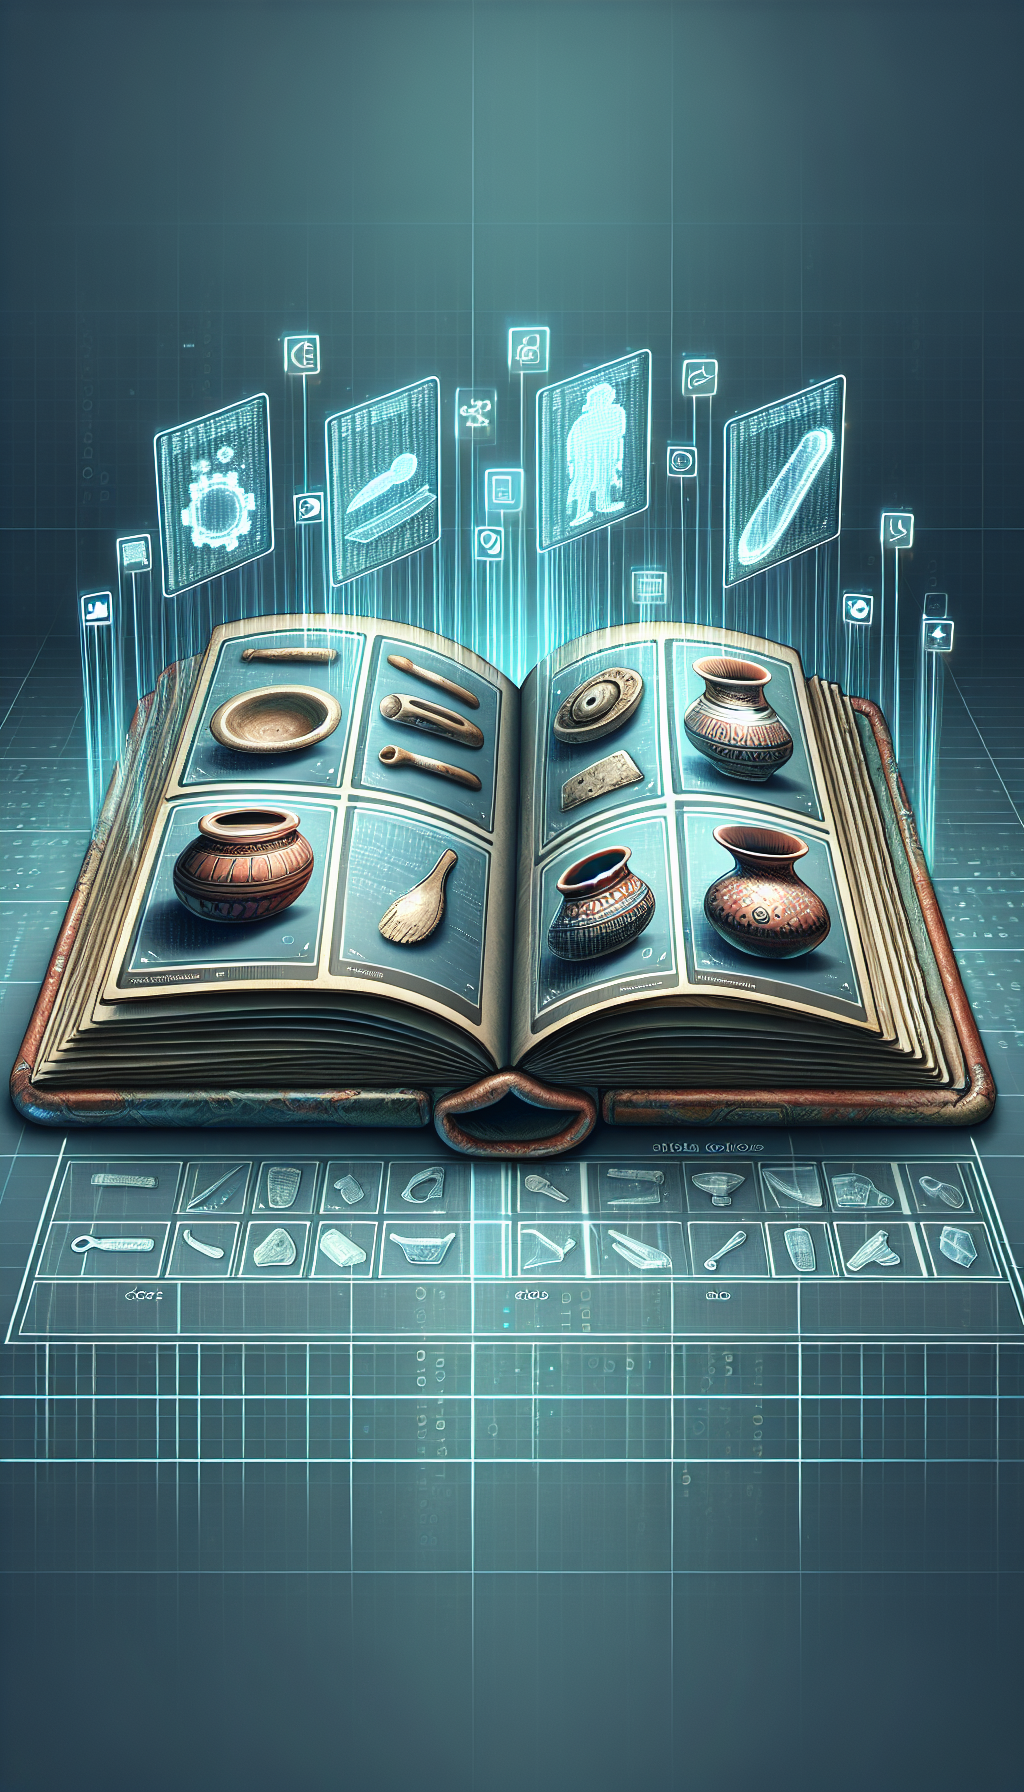 An illustration showing open digital book pages, one side with distinct categories of artifacts - ceramics in one, tools in another - each item tagged with a digital label. Above the book, holographic images of artifacts hover, as if being sorted into their categories. The backdrop displays a faded binary code motif, symbolizing the online guide.